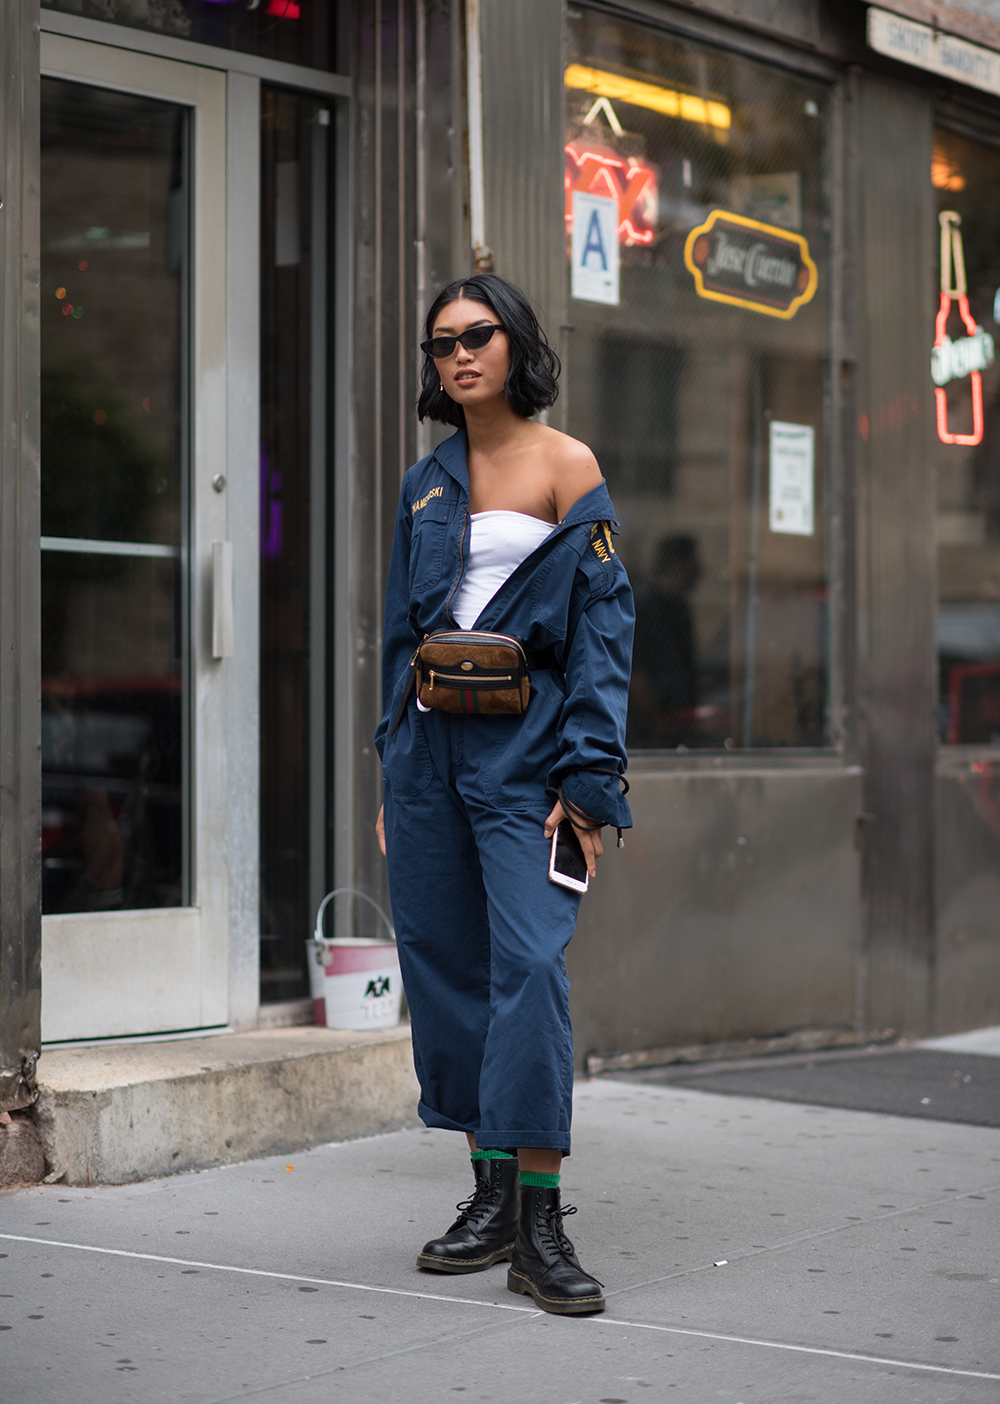 NEW YORK, NY - SEPTEMBER 08: A guest seen in the streets of Manhattan during the New York Fashion Week SS19 on September 8, 2018 in New York City. (Photo by Timur Emek/Getty Images)